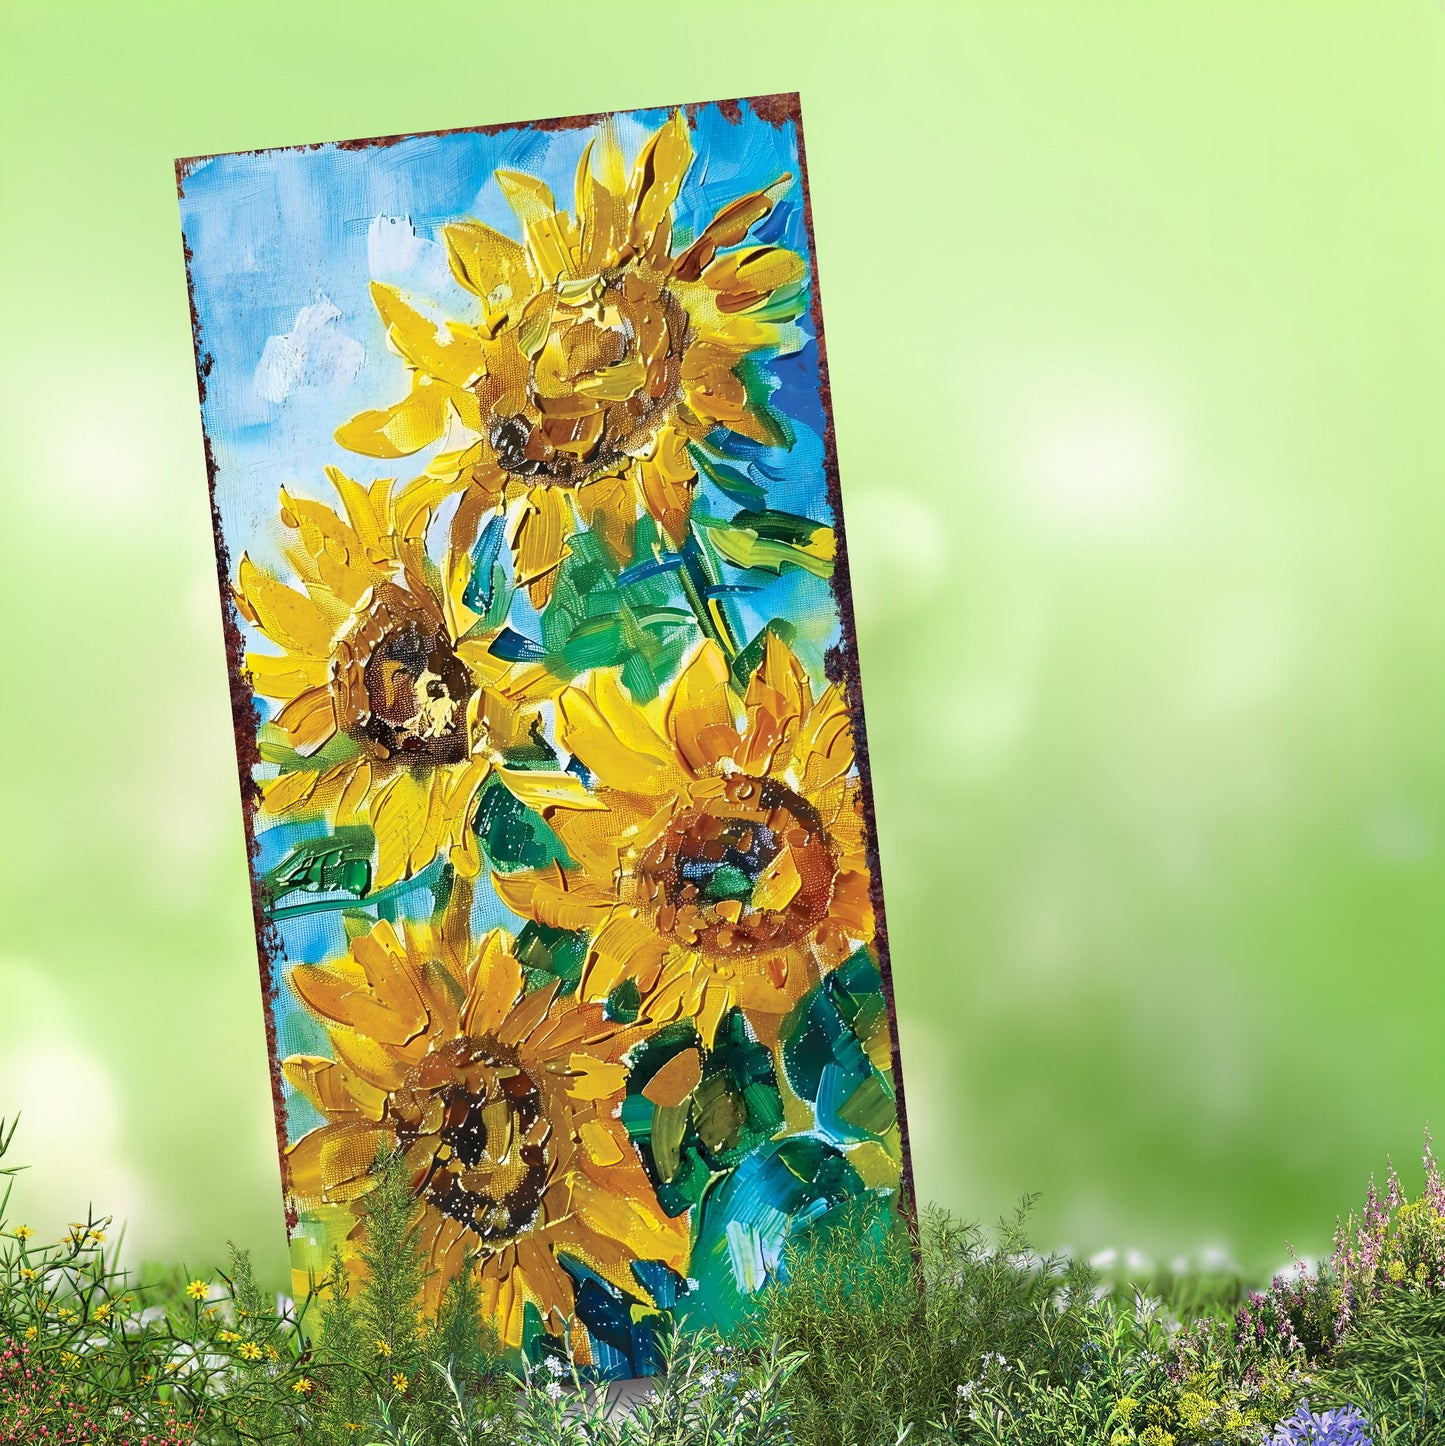 30in Summer Garden Stake - Oil Paint Style Sunflower Decor | Great for Outdoor Decor, Yard Art, and Garden Decorations